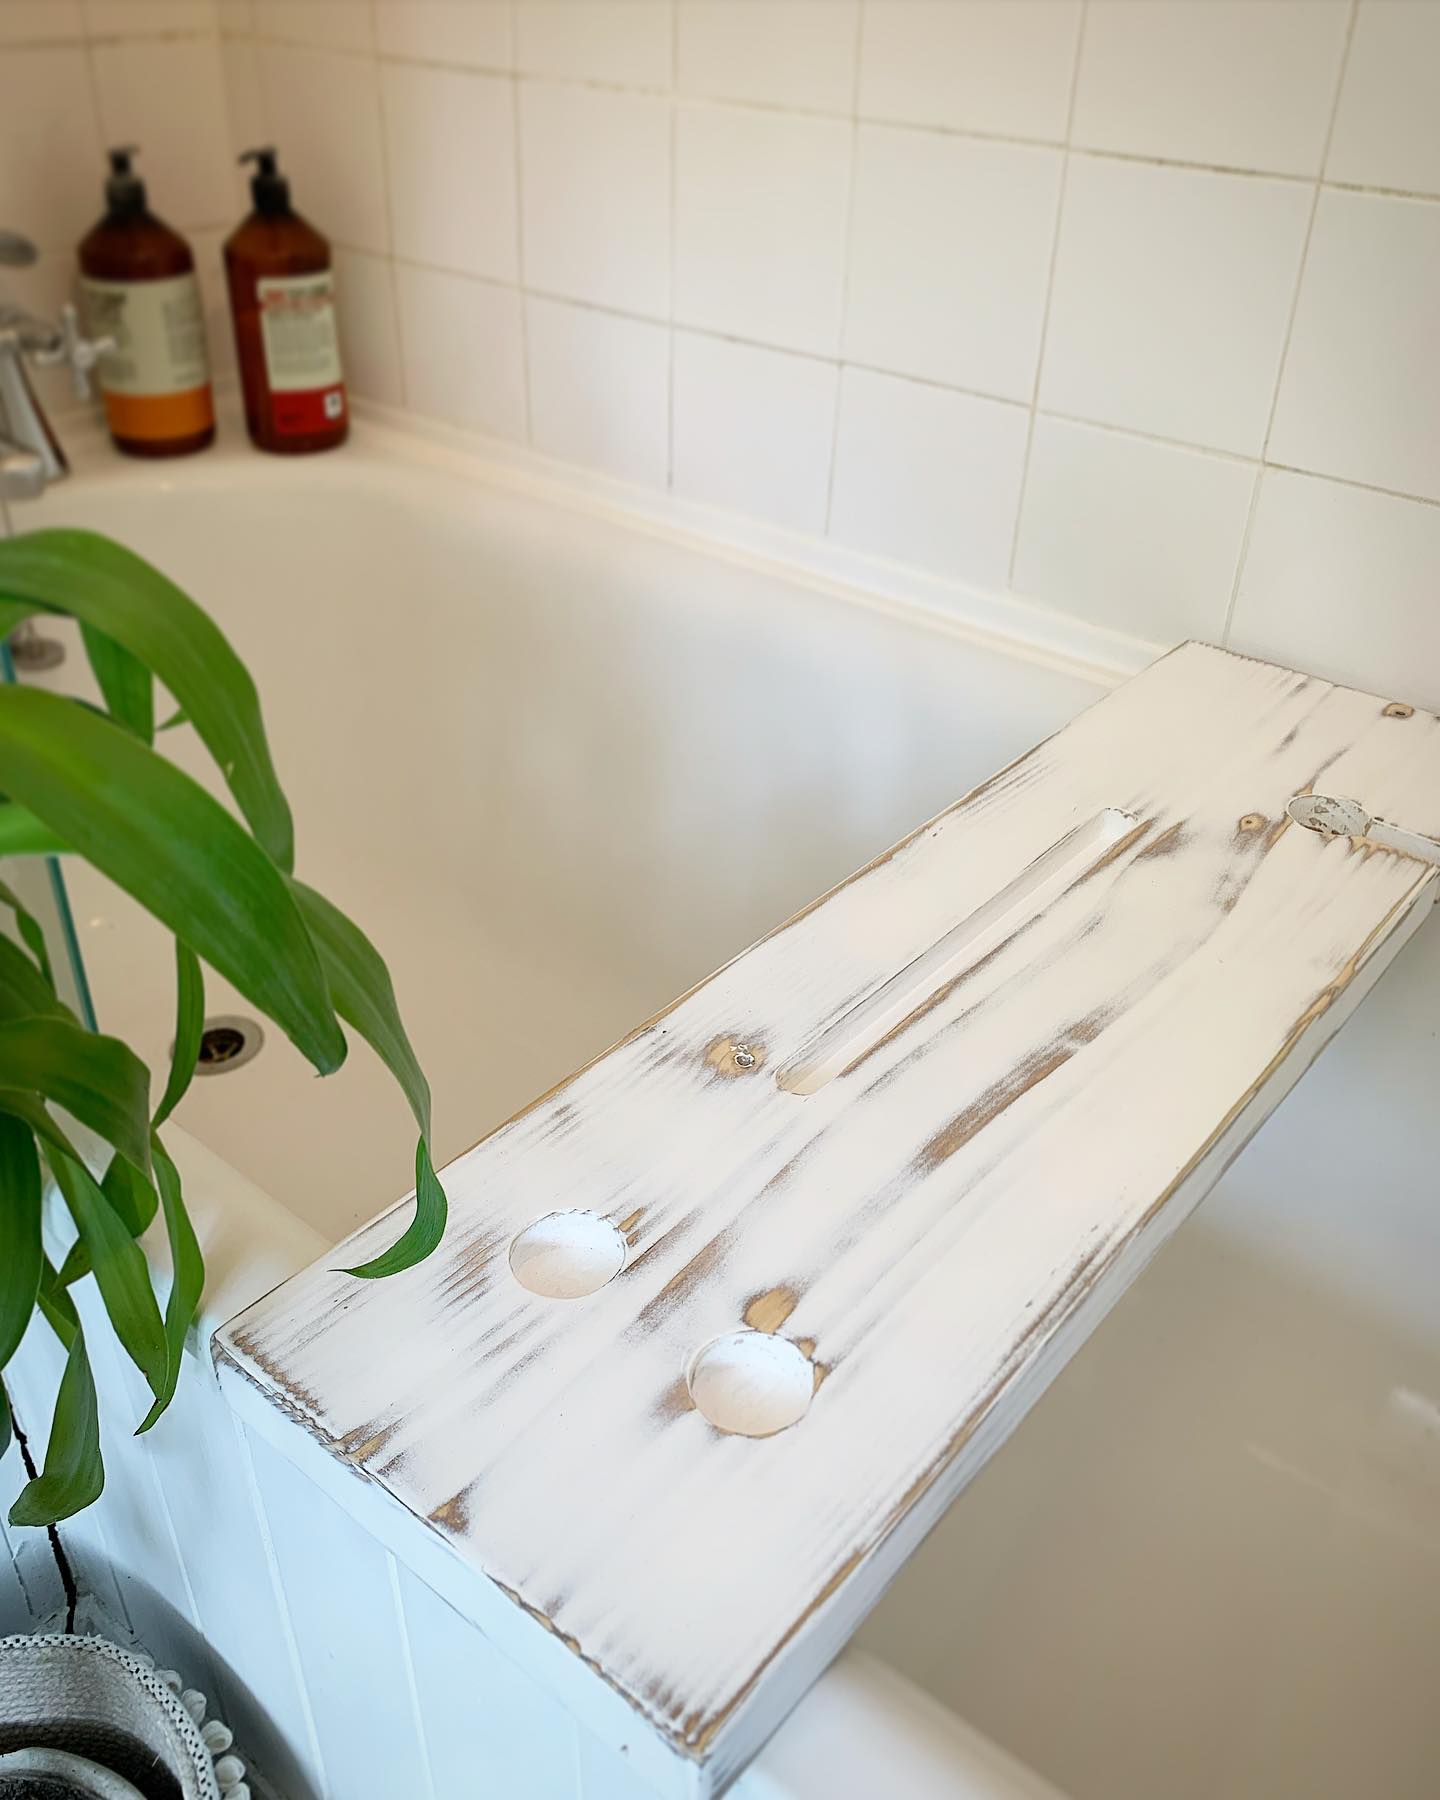 We’ve just finished another bespoke bath tray ? It’s all ready for some candles, a good glass of something and an episode of one of your favourite tv shows to enjoy in the tub!...#bathtime #bubbles #homedecor #indulge #relax #aroma #atmosphere #metime #bathroomaccessories #treatyourself #madetoorder #bespoke